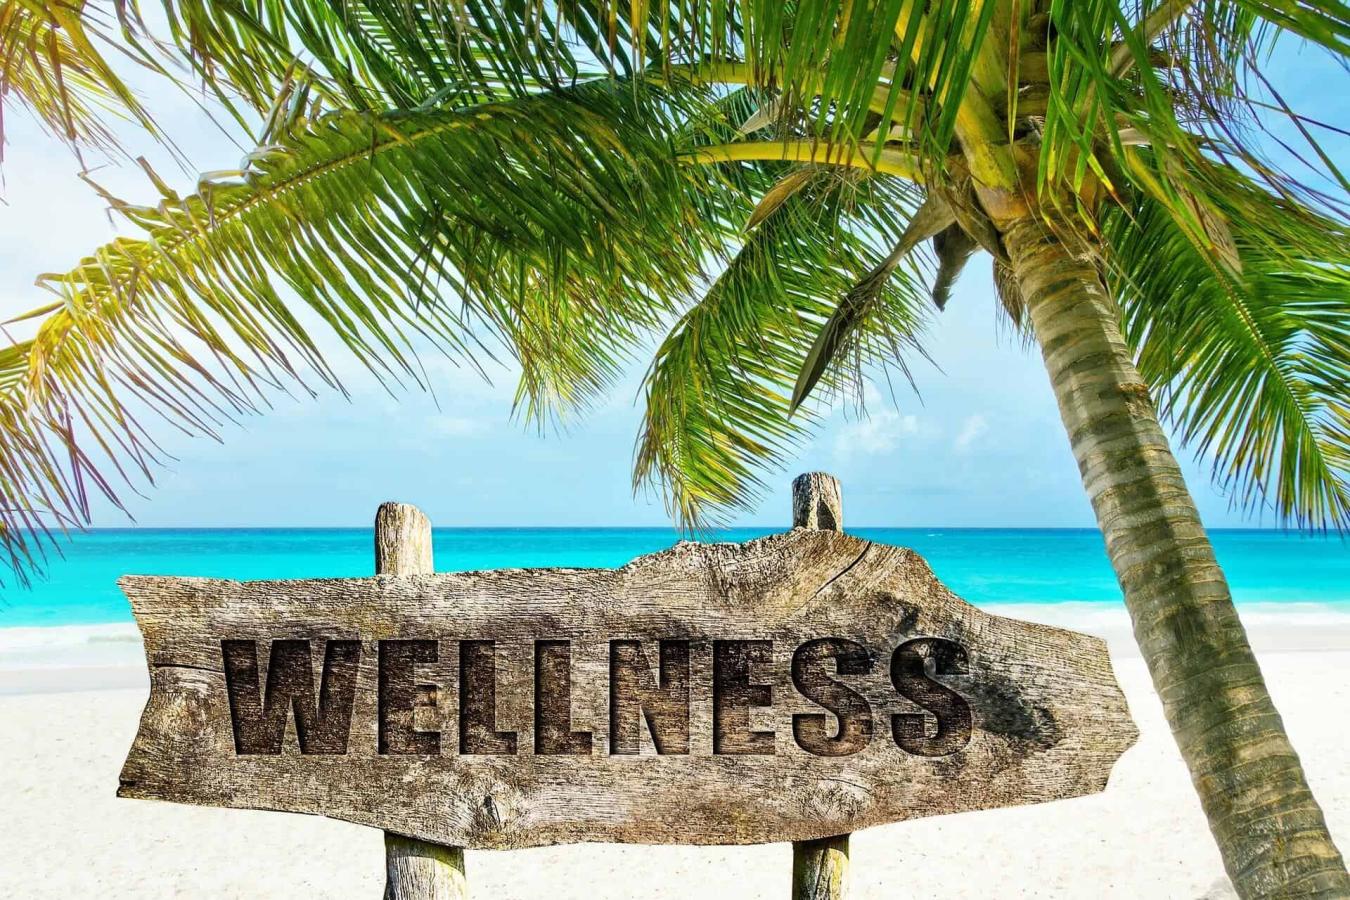 What Are Some Of The Most Popular Wellness Retreat Destinations?